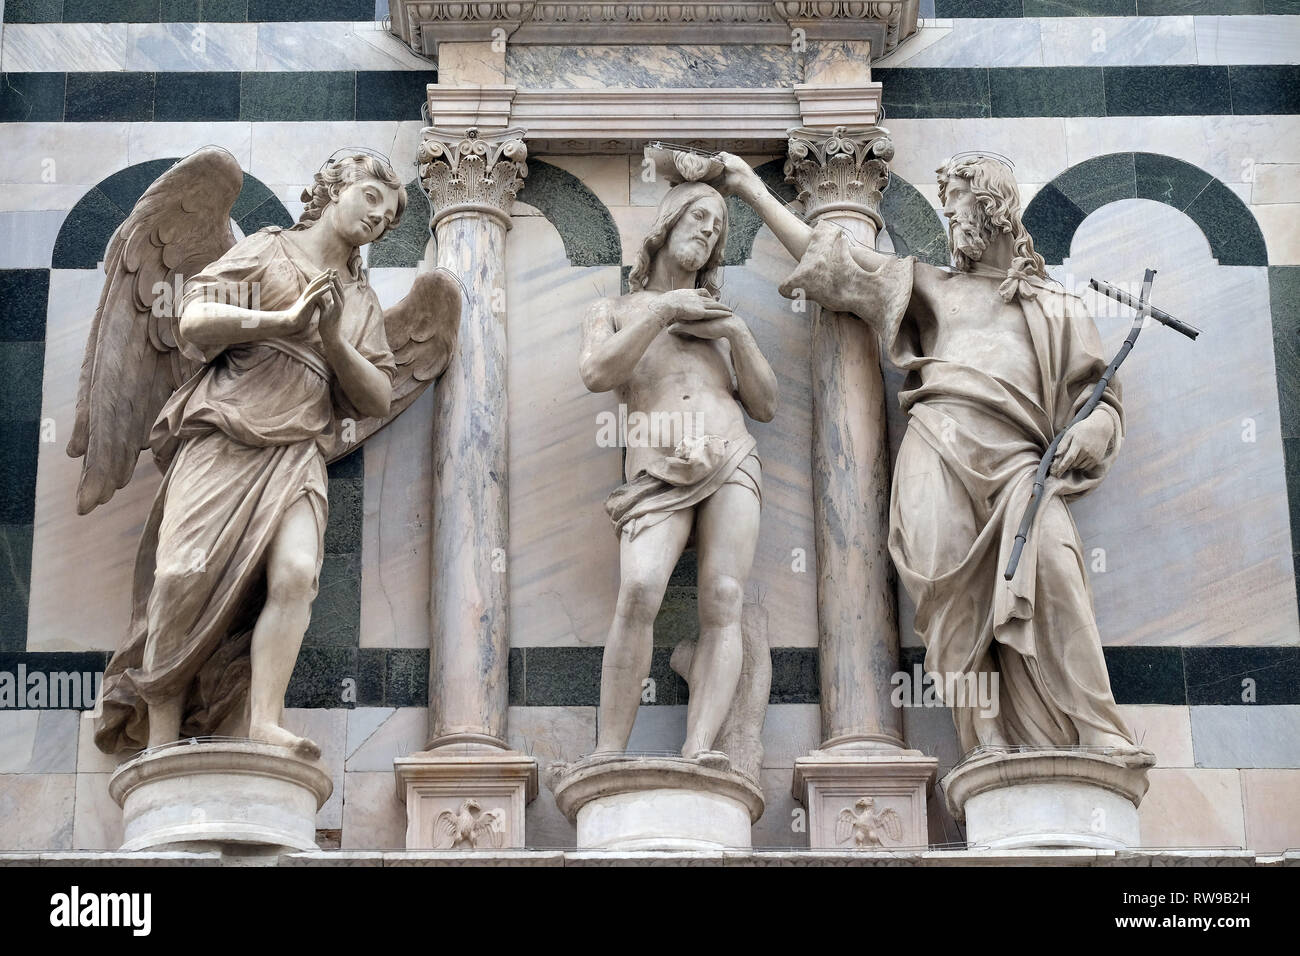 The Baptism of Jesus Christ, Florence cathedral, Baptistry of Saint John, Florence, Italy Stock Photo